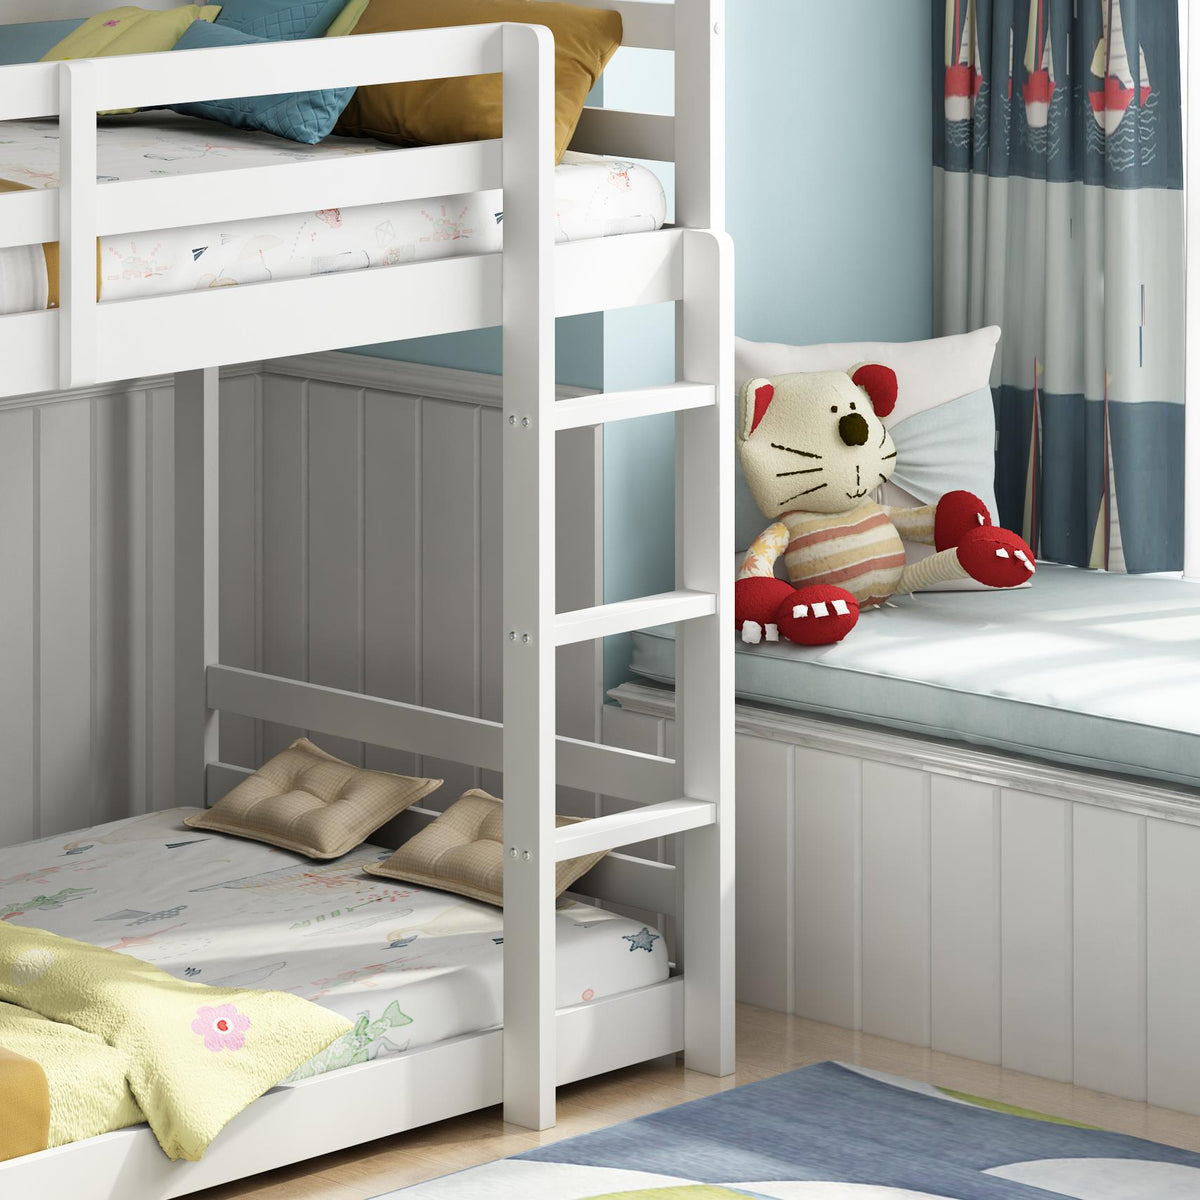 House Bunkbed kids white 3ft single twin bunk bed and 2 mattresses wooden childrens bedroom furniture